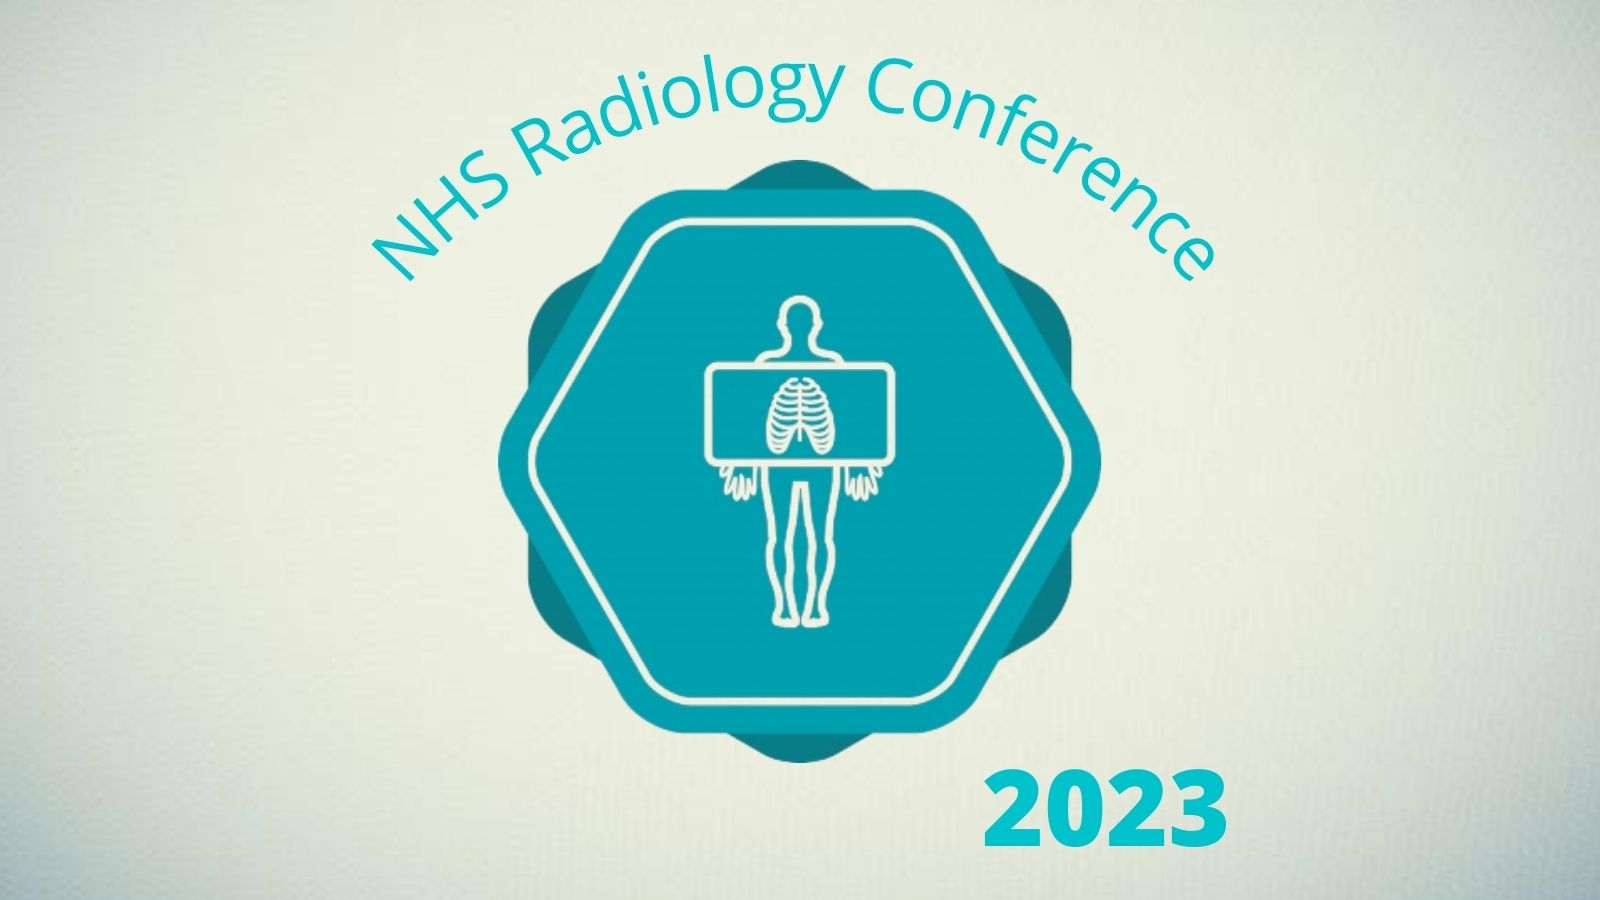 Convenzis Event The NHS Radiology Conference 2023